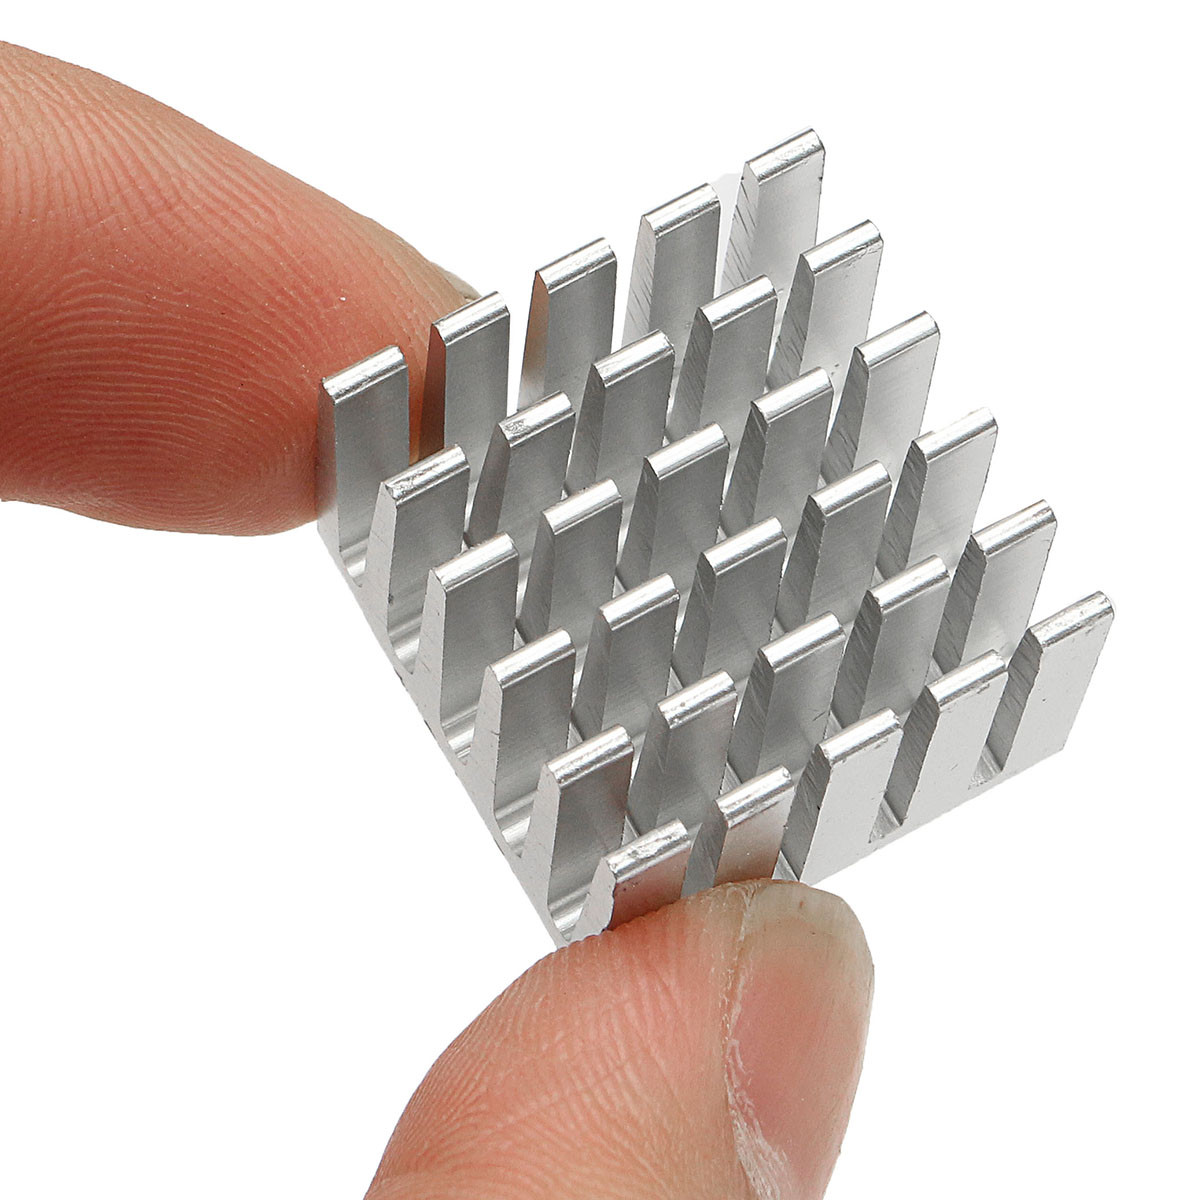 Find 1pcs 20x20x15mm DIY CPU IC Chip Heat Sink Extruded Cooler Aluminum Heat Sink for Sale on Gipsybee.com with cryptocurrencies